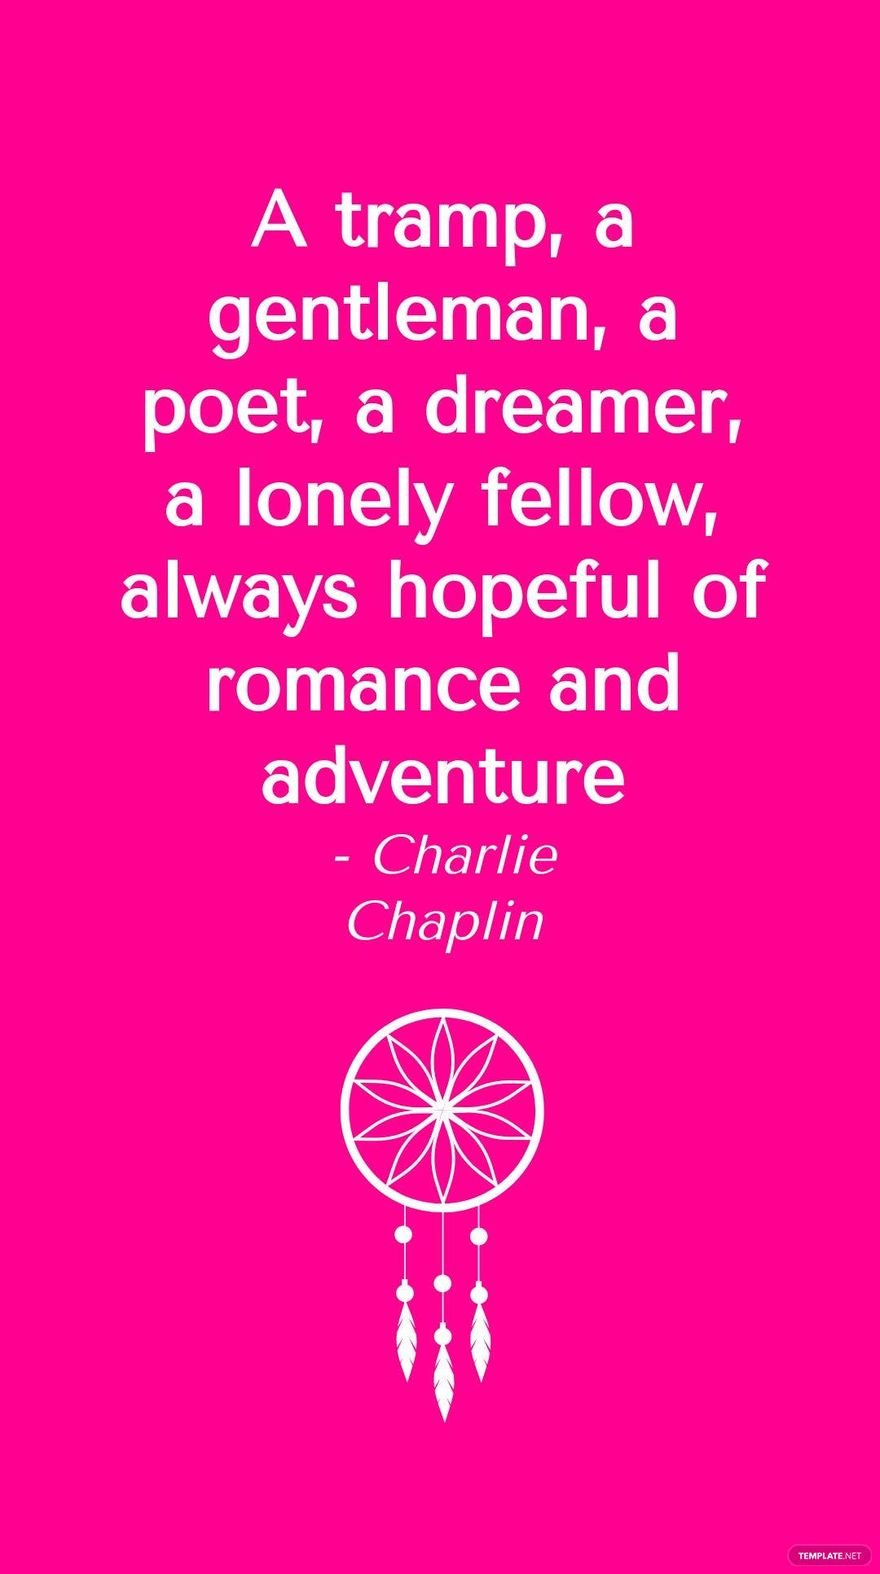 Free Charlie Chaplin - A tramp, a gentleman, a poet, a dreamer, a lonely fellow, always hopeful of romance and adventure in JPG